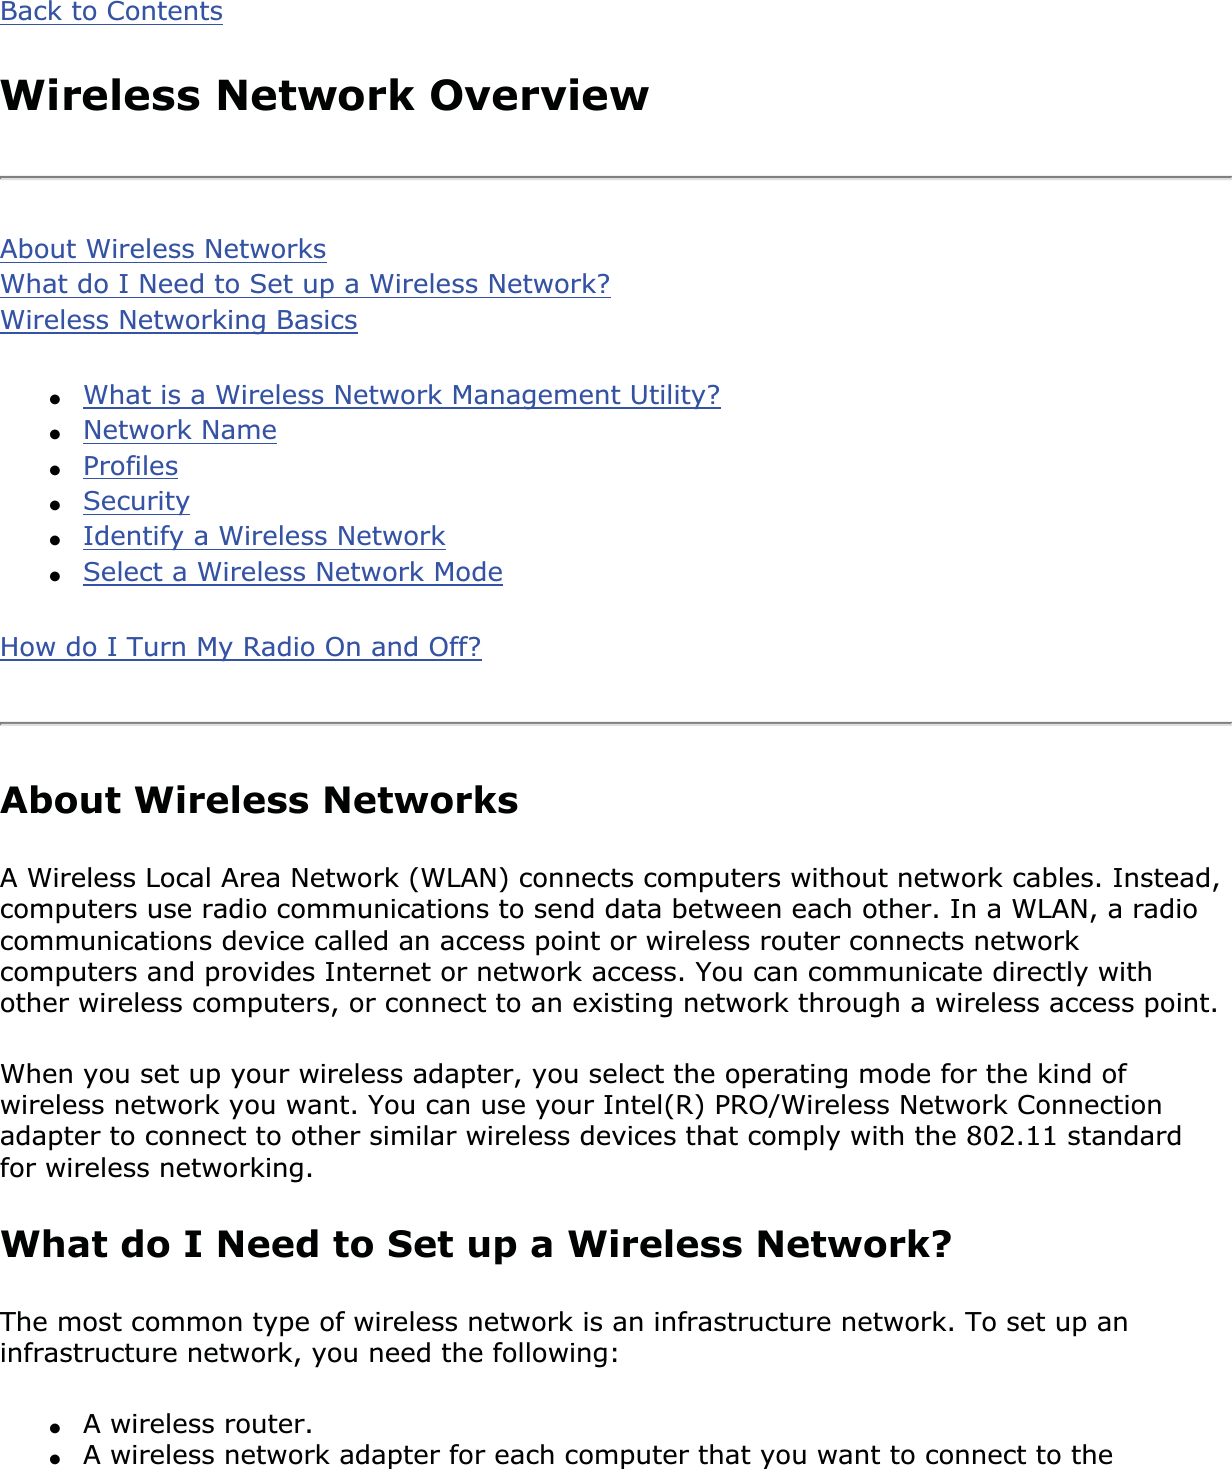 Back to ContentsWireless Network OverviewAbout Wireless NetworksWhat do I Need to Set up a Wireless Network?Wireless Networking Basics●What is a Wireless Network Management Utility?●Network Name●Profiles●Security●Identify a Wireless Network●Select a Wireless Network ModeHow do I Turn My Radio On and Off?About Wireless NetworksA Wireless Local Area Network (WLAN) connects computers without network cables. Instead, computers use radio communications to send data between each other. In a WLAN, a radio communications device called an access point or wireless router connects network computers and provides Internet or network access. You can communicate directly with other wireless computers, or connect to an existing network through a wireless access point. When you set up your wireless adapter, you select the operating mode for the kind of wireless network you want. You can use your Intel(R) PRO/Wireless Network Connection adapter to connect to other similar wireless devices that comply with the 802.11 standard for wireless networking. What do I Need to Set up a Wireless Network? The most common type of wireless network is an infrastructure network. To set up an infrastructure network, you need the following:●A wireless router.●A wireless network adapter for each computer that you want to connect to the 